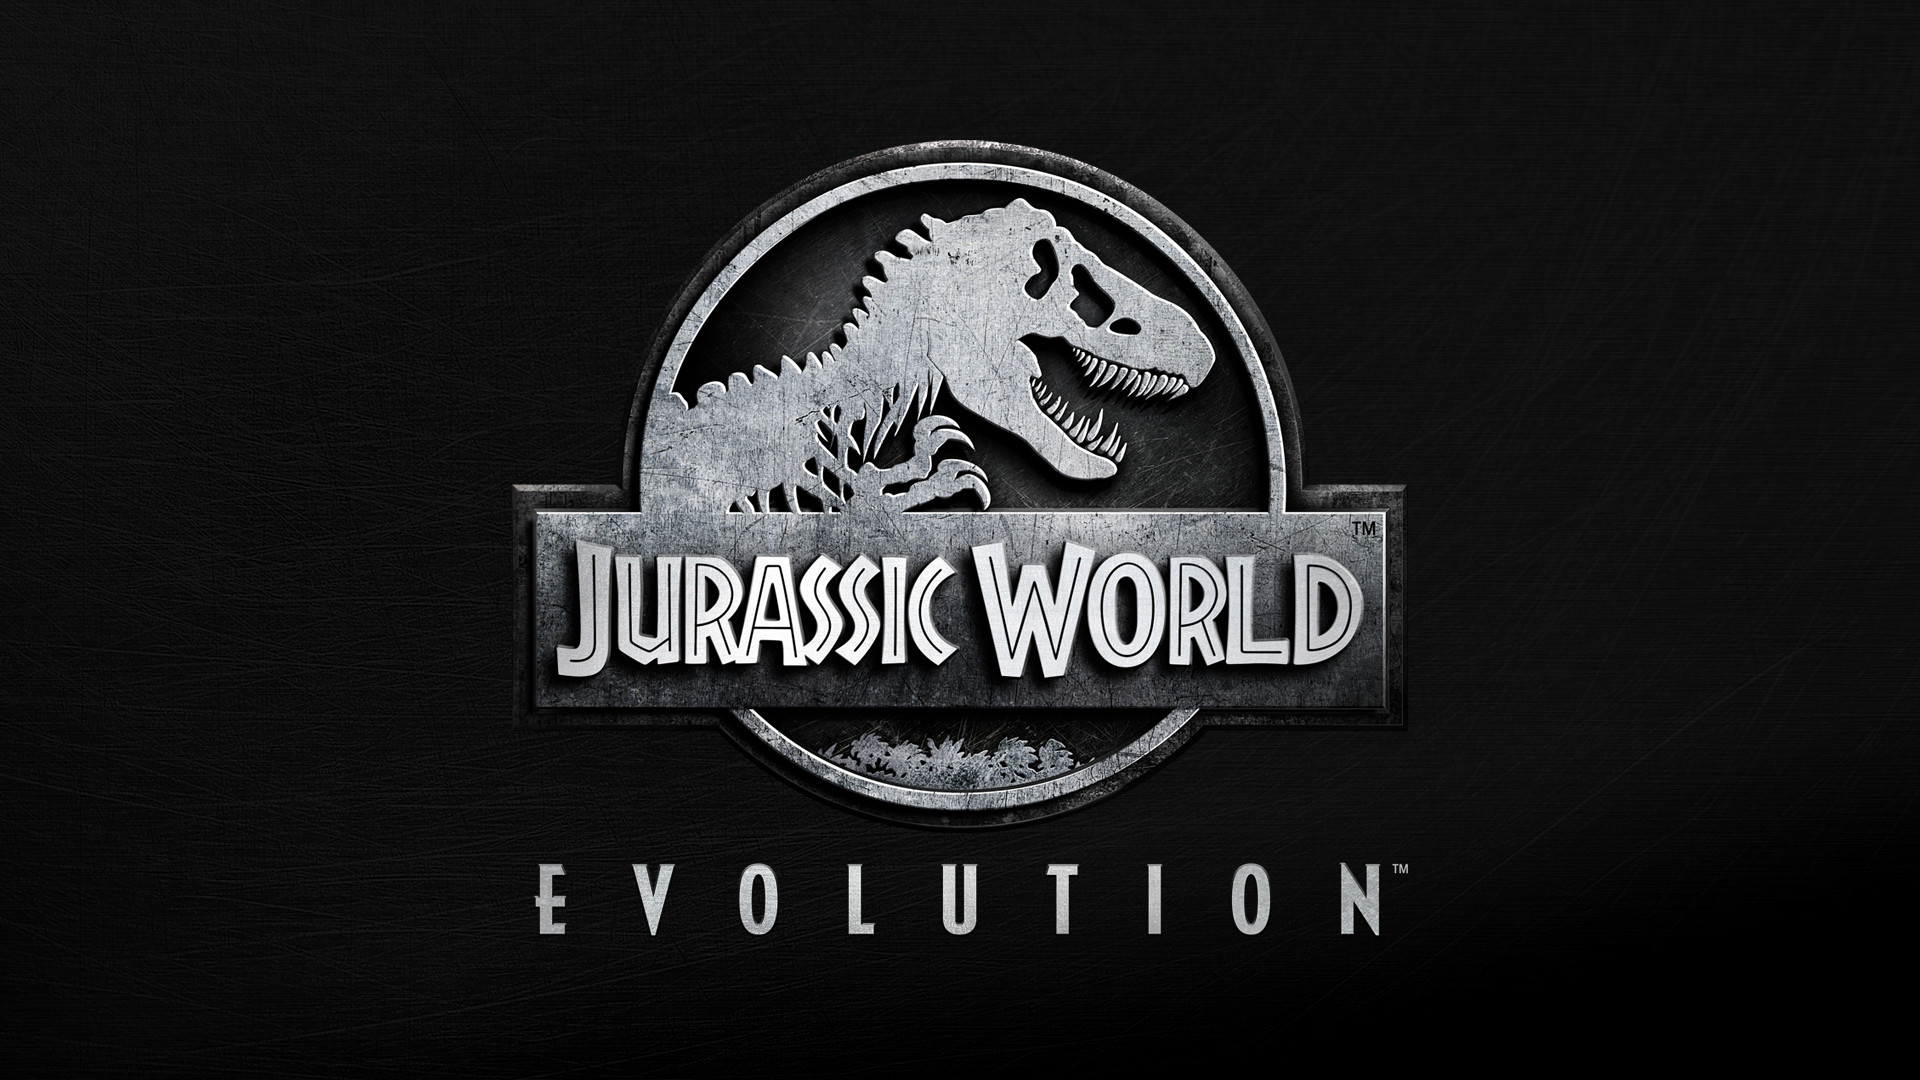 1920x1080 ... Developments announced Jurassic World Evolution during the Xbox  Gamescom 2017 show. The game is coming to PC, PlayStation 4 and Xbox One in Summer  2018.